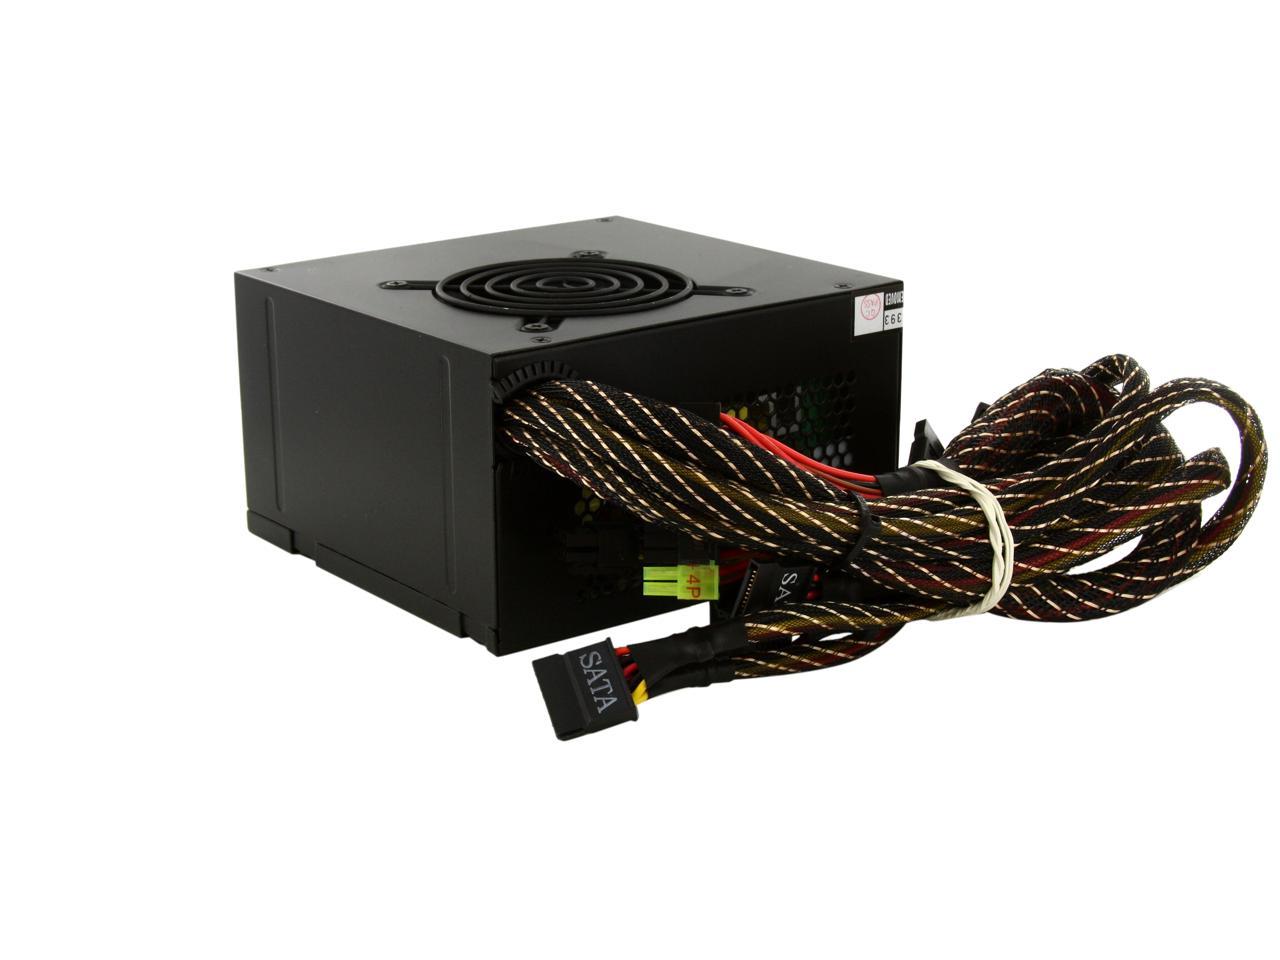 RD400-2-SB Rosewill Computer Power Supply for Gaming PC Desktop System 80 White 400W Power Supply